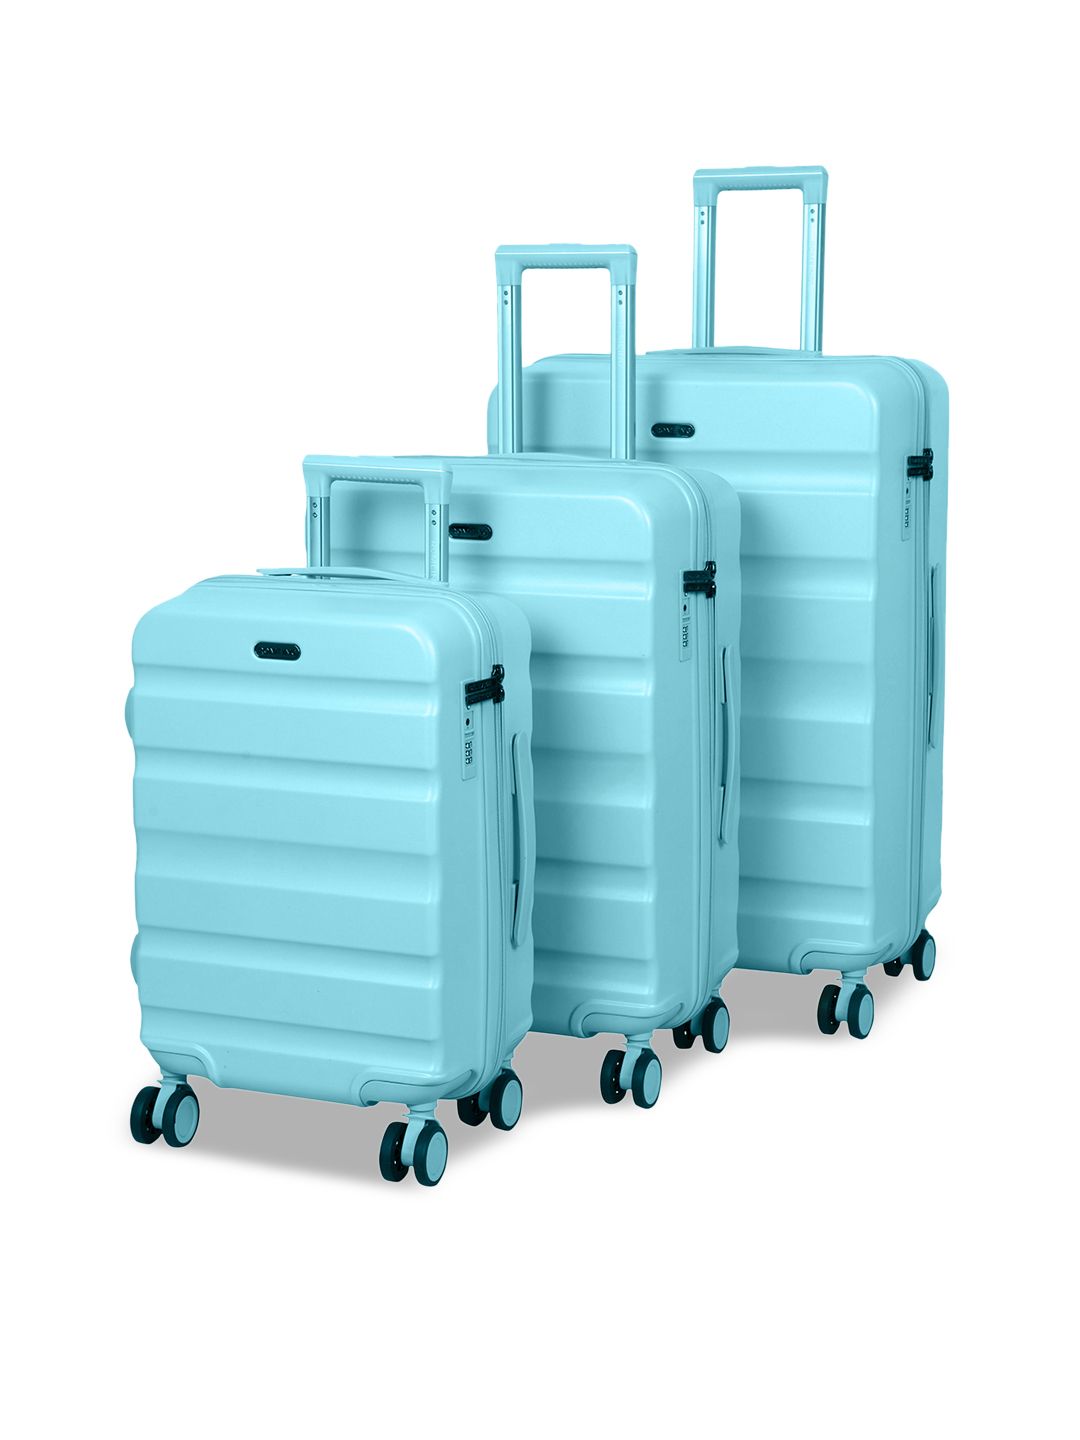 ROMEING Venice Set of 3 Sky Blue Textured Hard-Sided Polycarbonate Trolley Suitcases Price in India